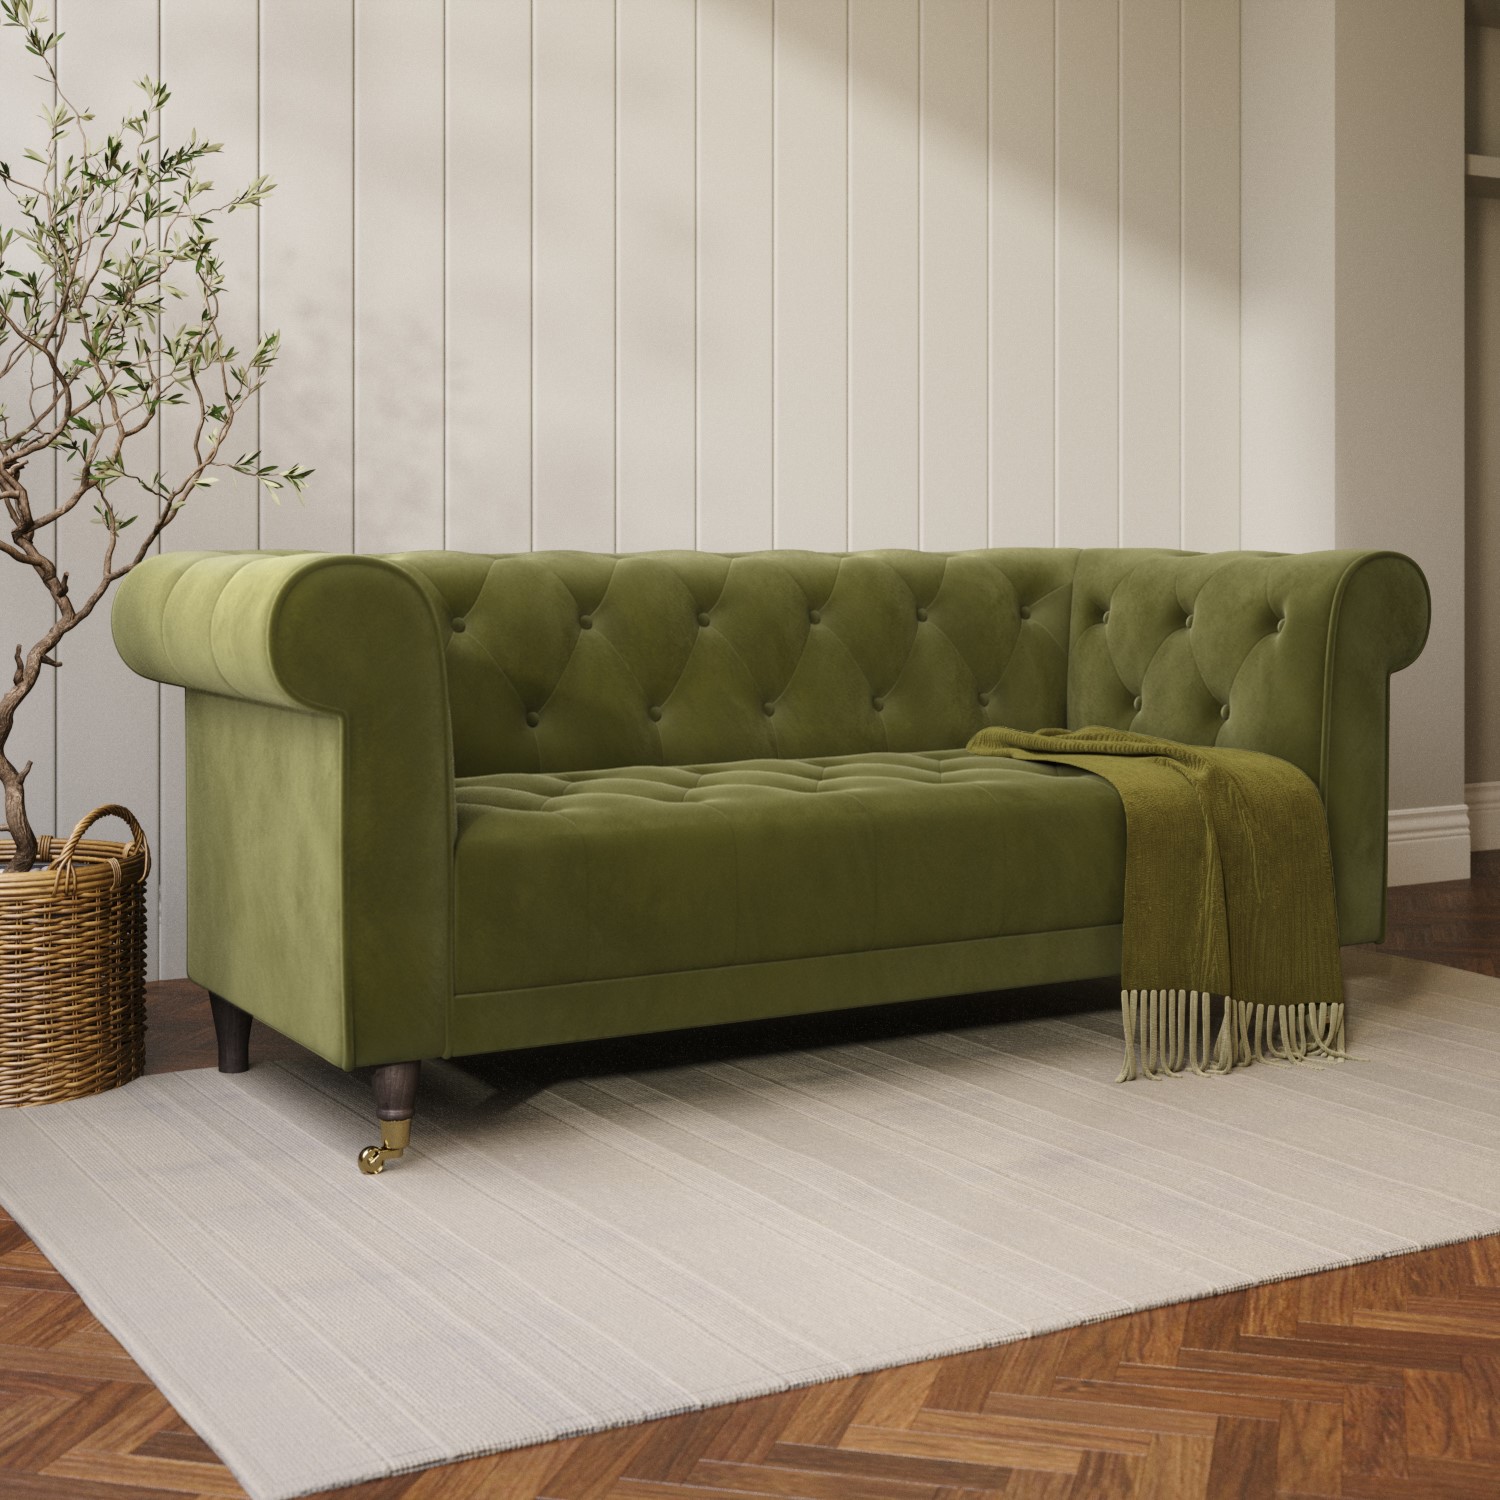 Read more about Olive velvet chesterfield sofa seats 3 ophelia